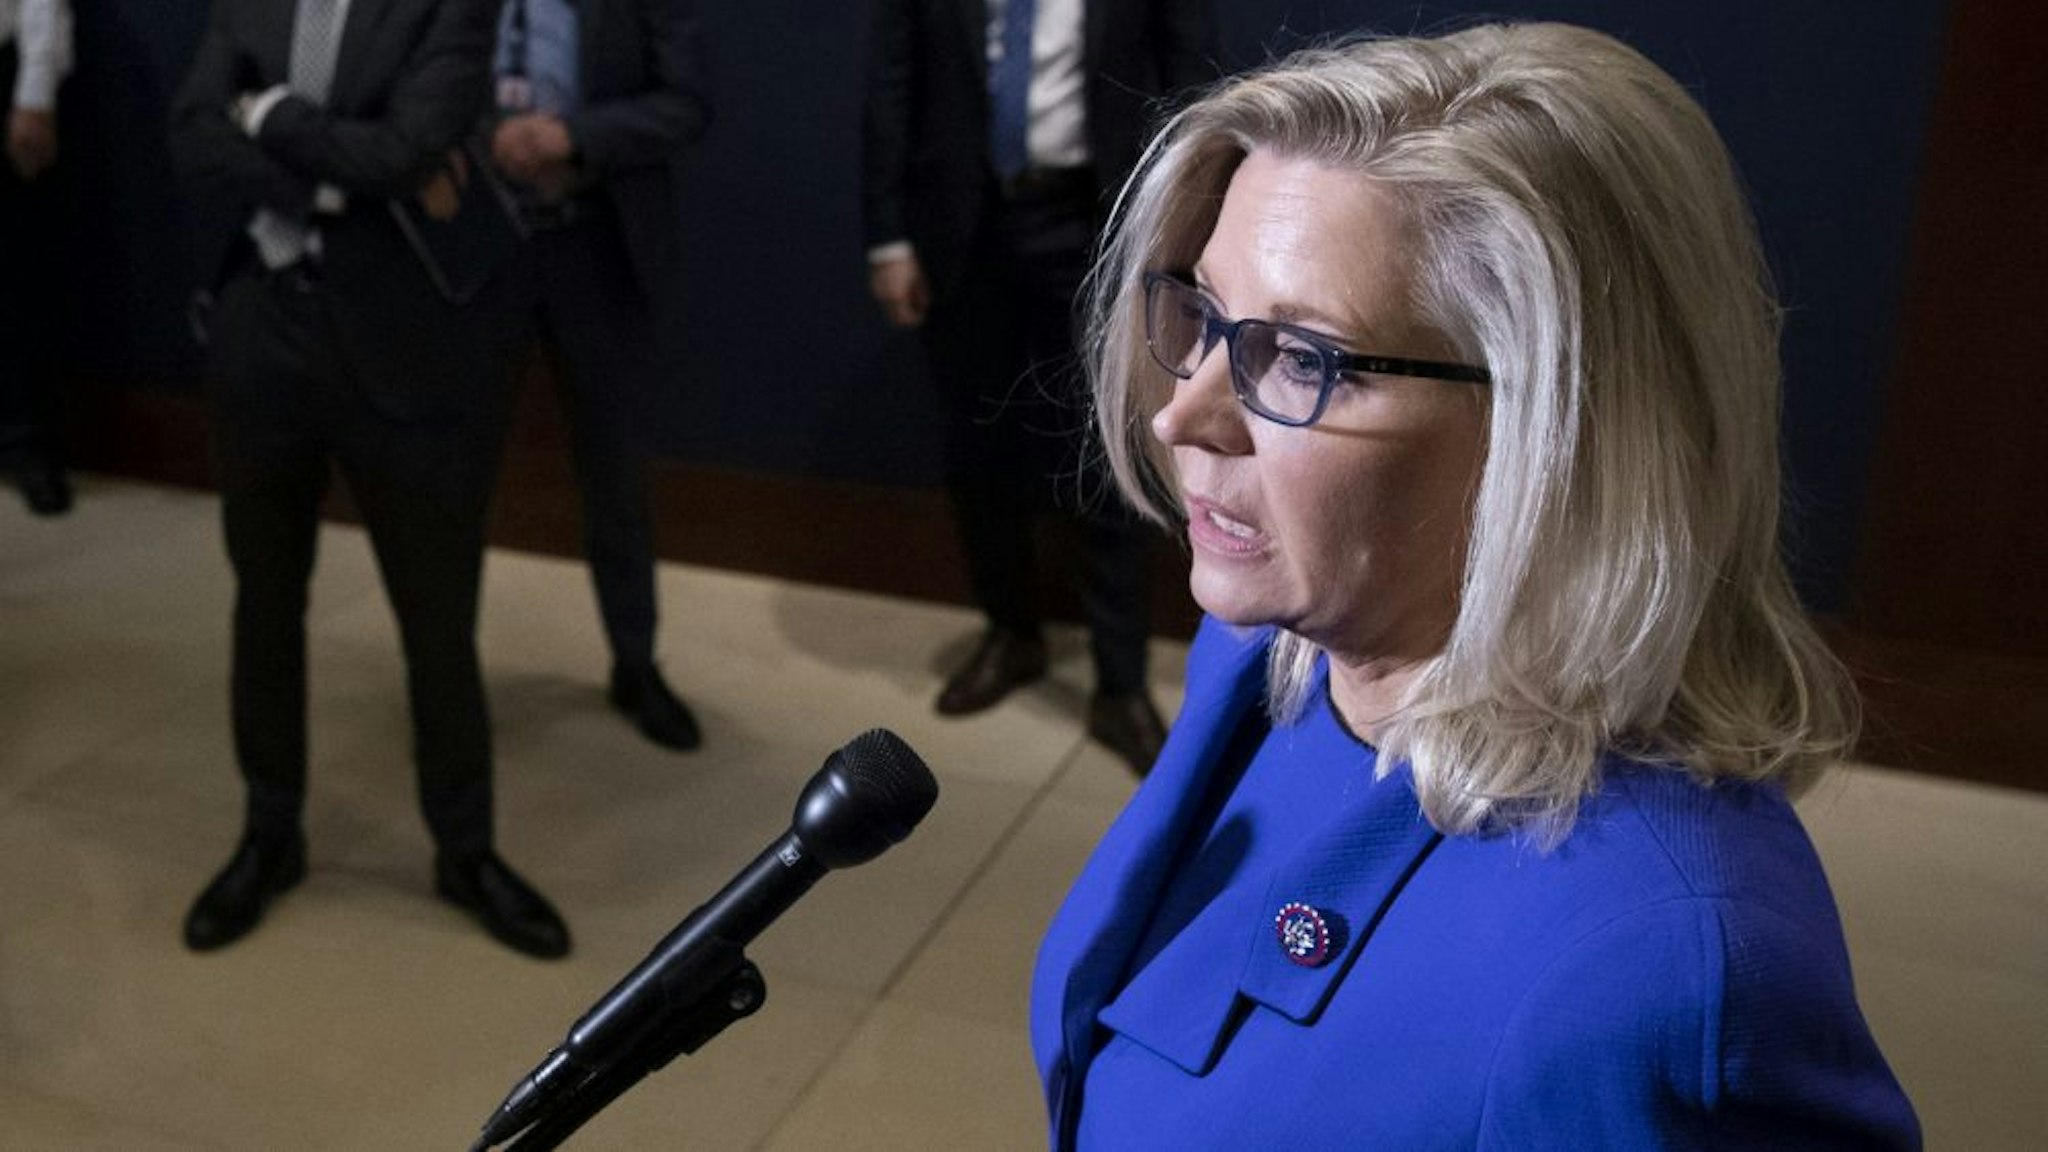 UNITED STATES - May 12: Rep. Liz Cheney, R-Wyo., speaks to reporters after House Republicans voted to oust her from her leadership post as chair of the House Republican Conference in Washington on Wednesday, May 12, 2021.